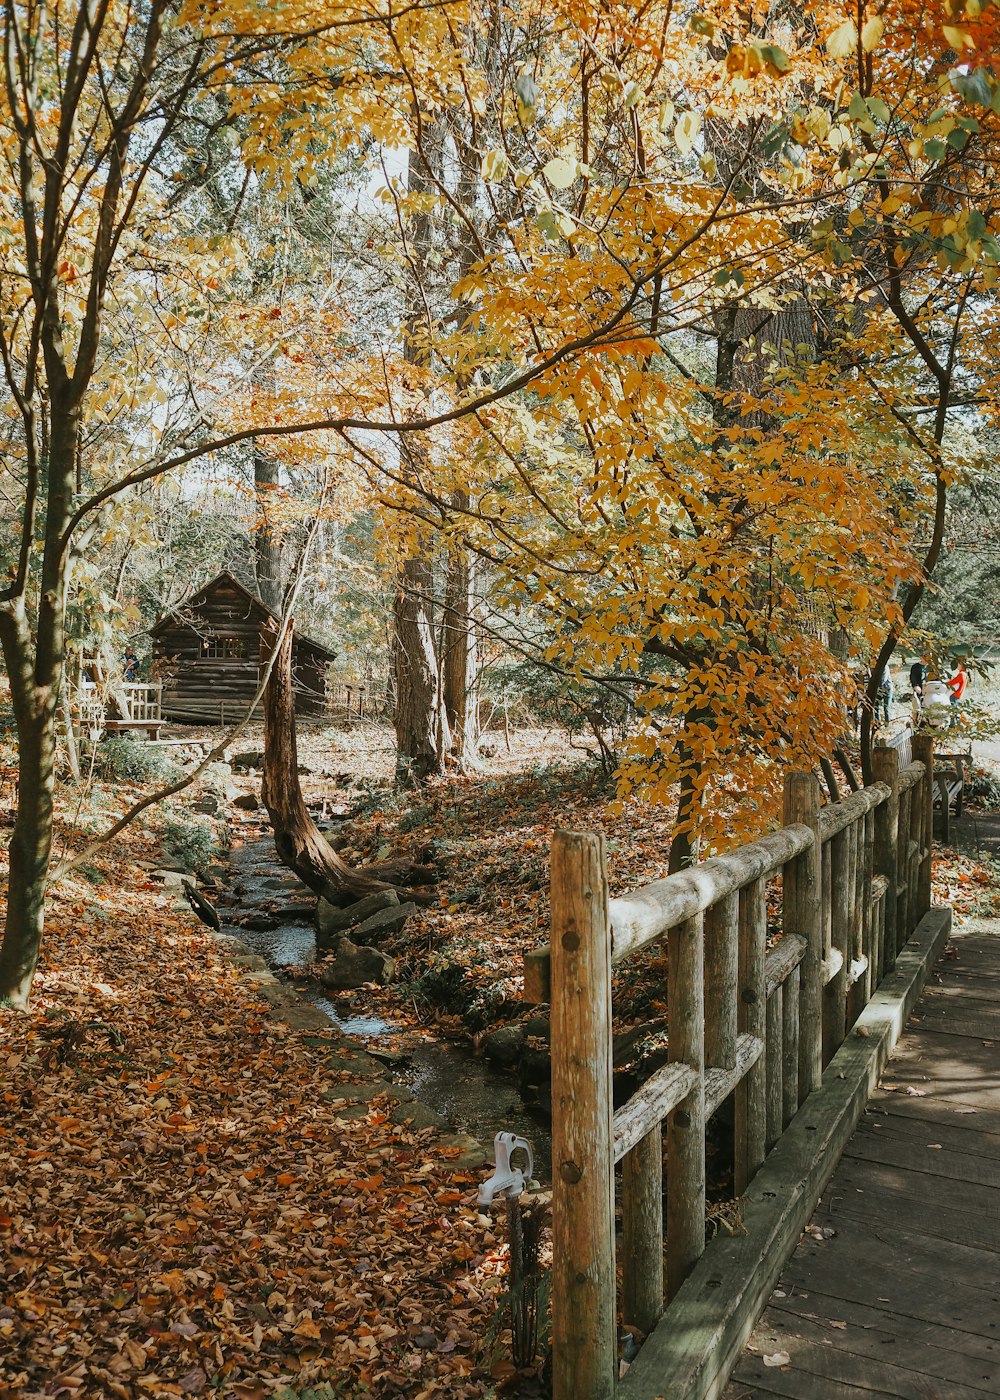 a wooden bridge over a creek surrounded by trees